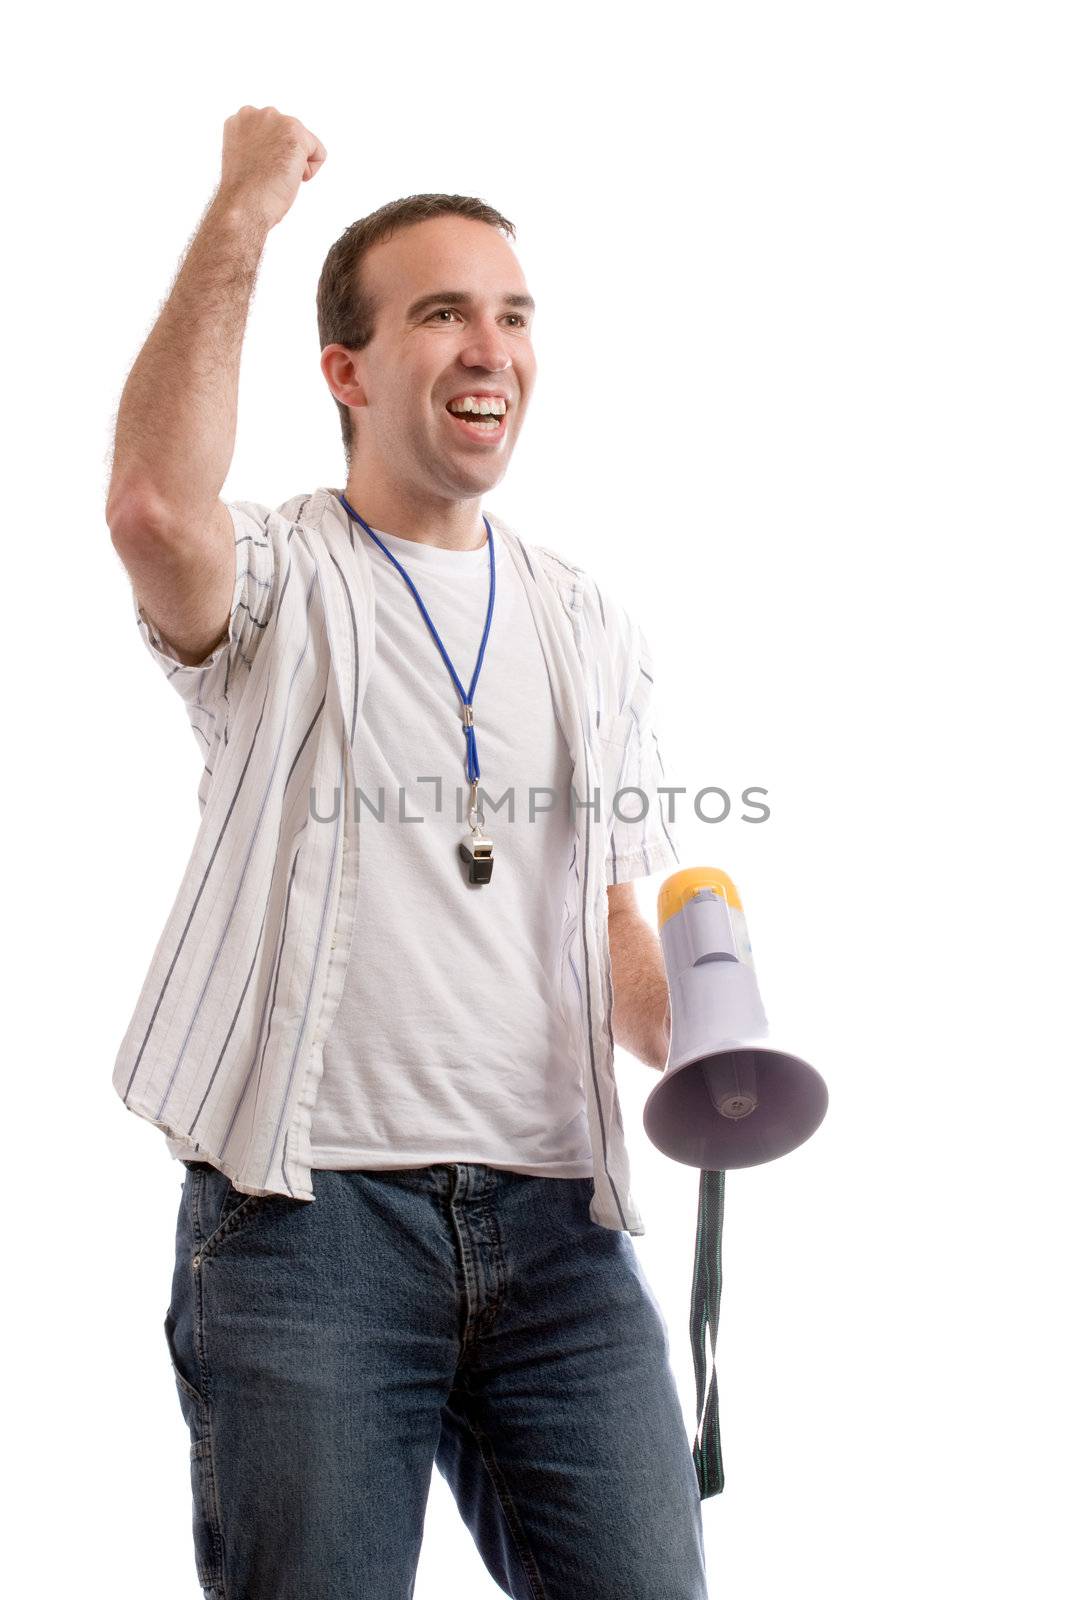 A sports fan shaking his fist in the air and looking excited, isolated against a white background